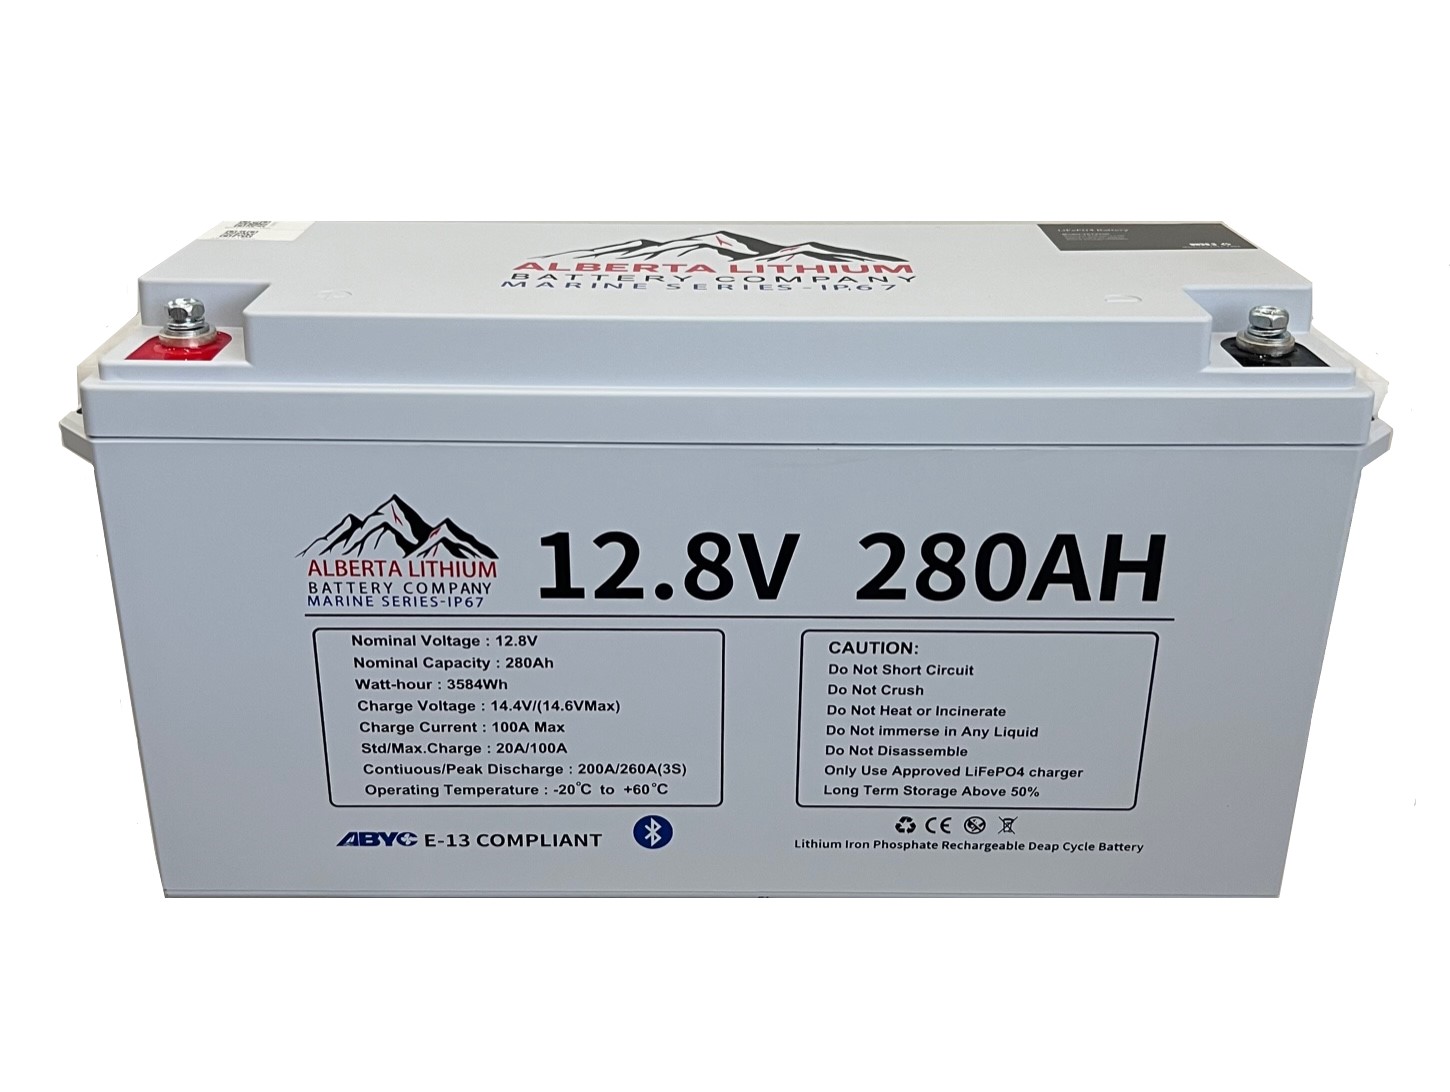 Dr. Prepare 12v 100ah Battery Review. This is a top notch battery! 